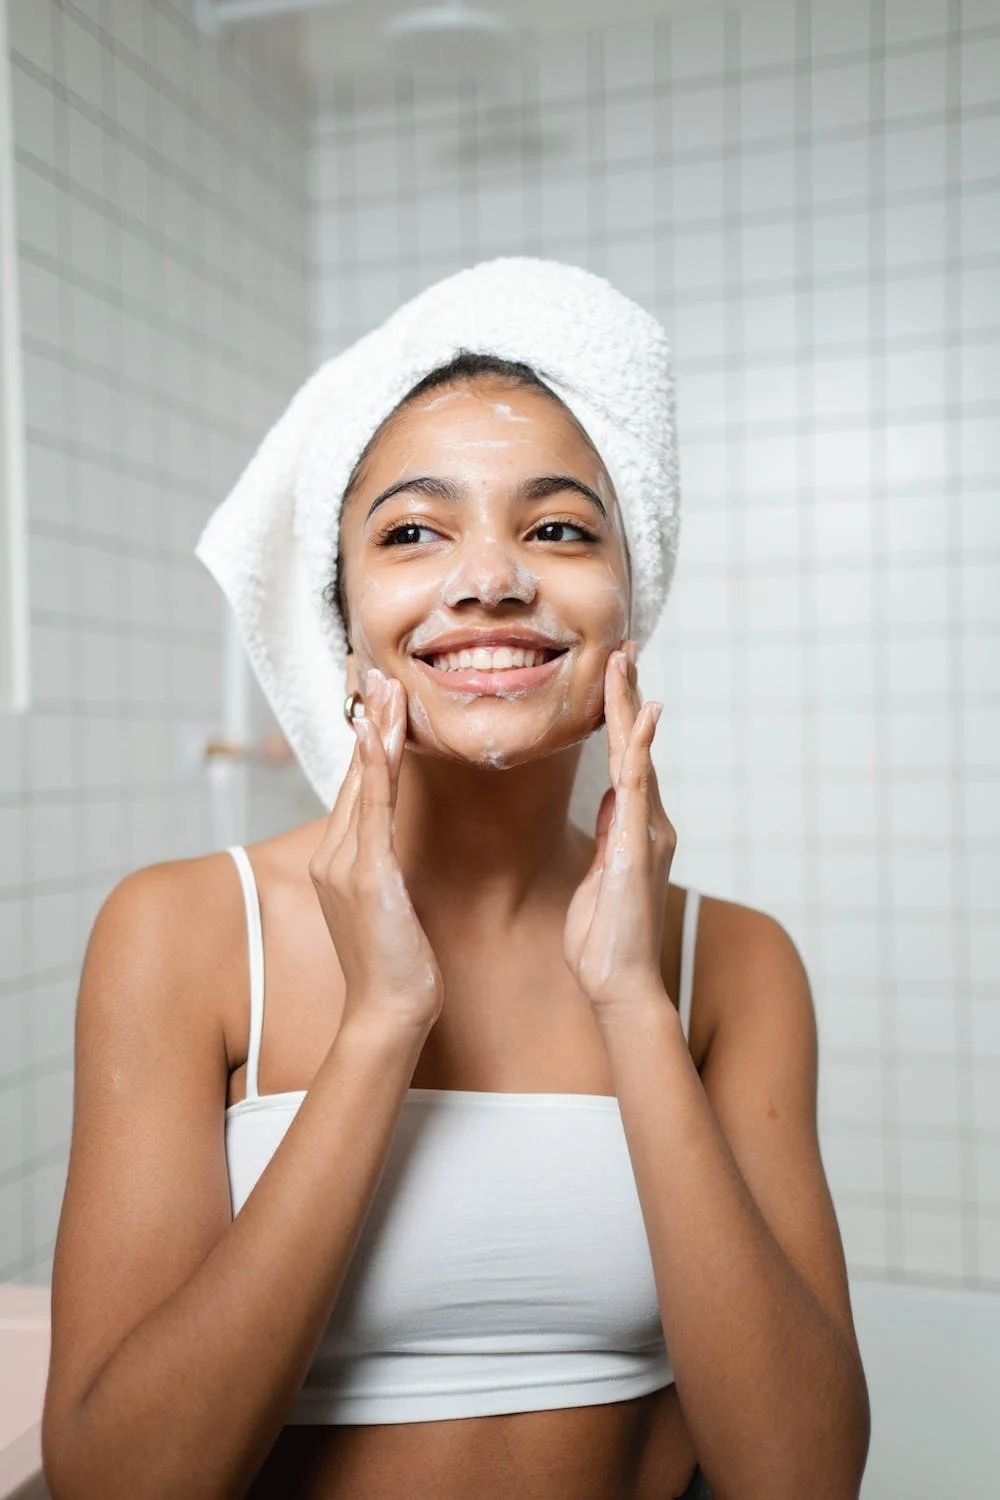 Facial cleansers that help you improve dry skin range from affordable to high-end 1